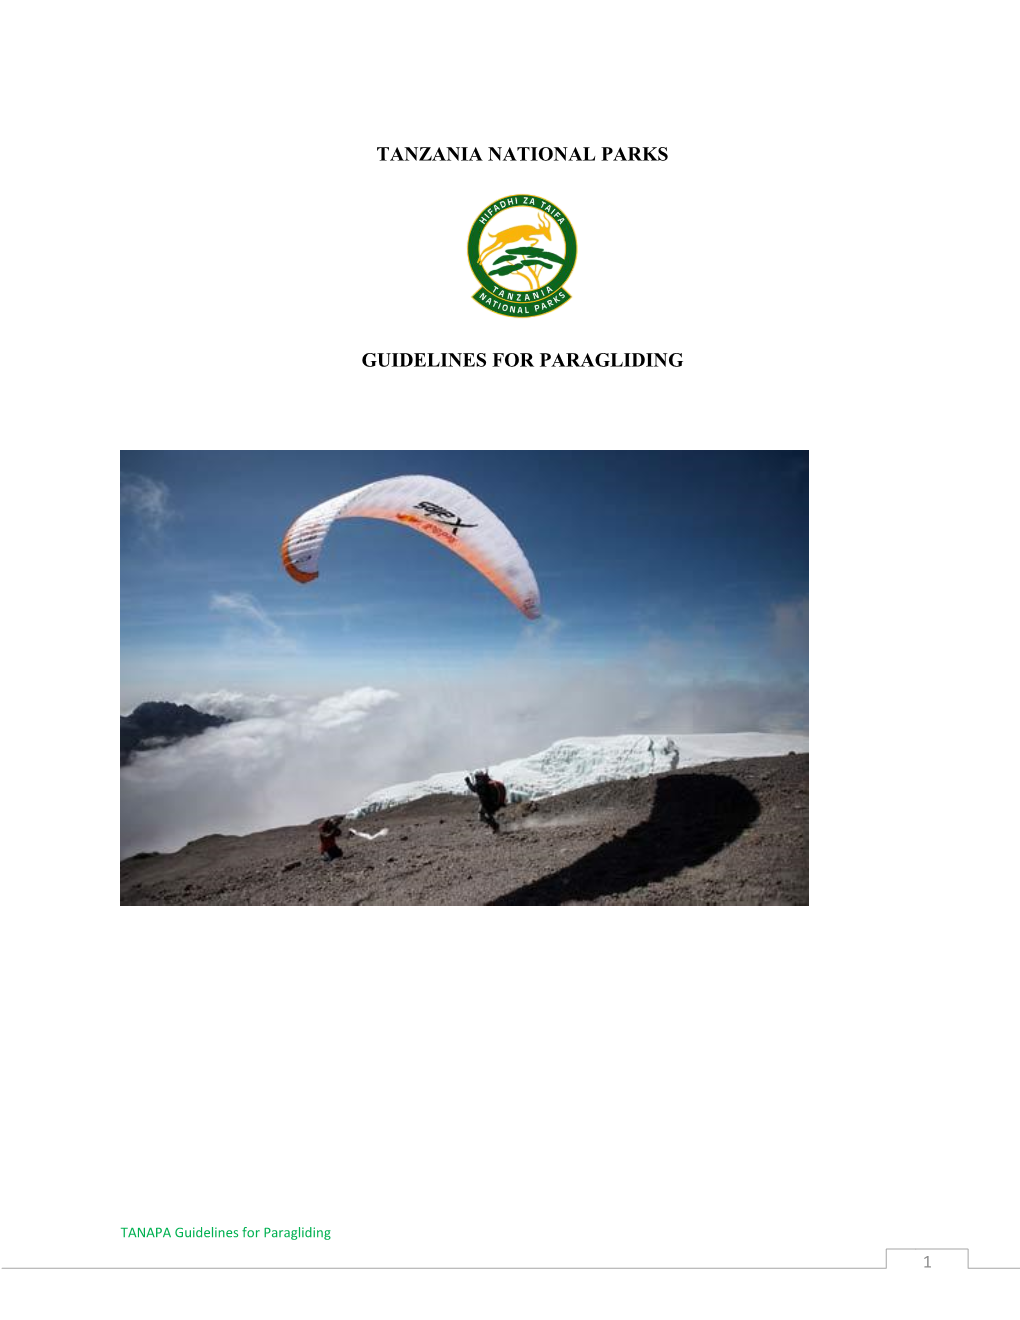 Tanzania National Parks Guidelines for Paragliding